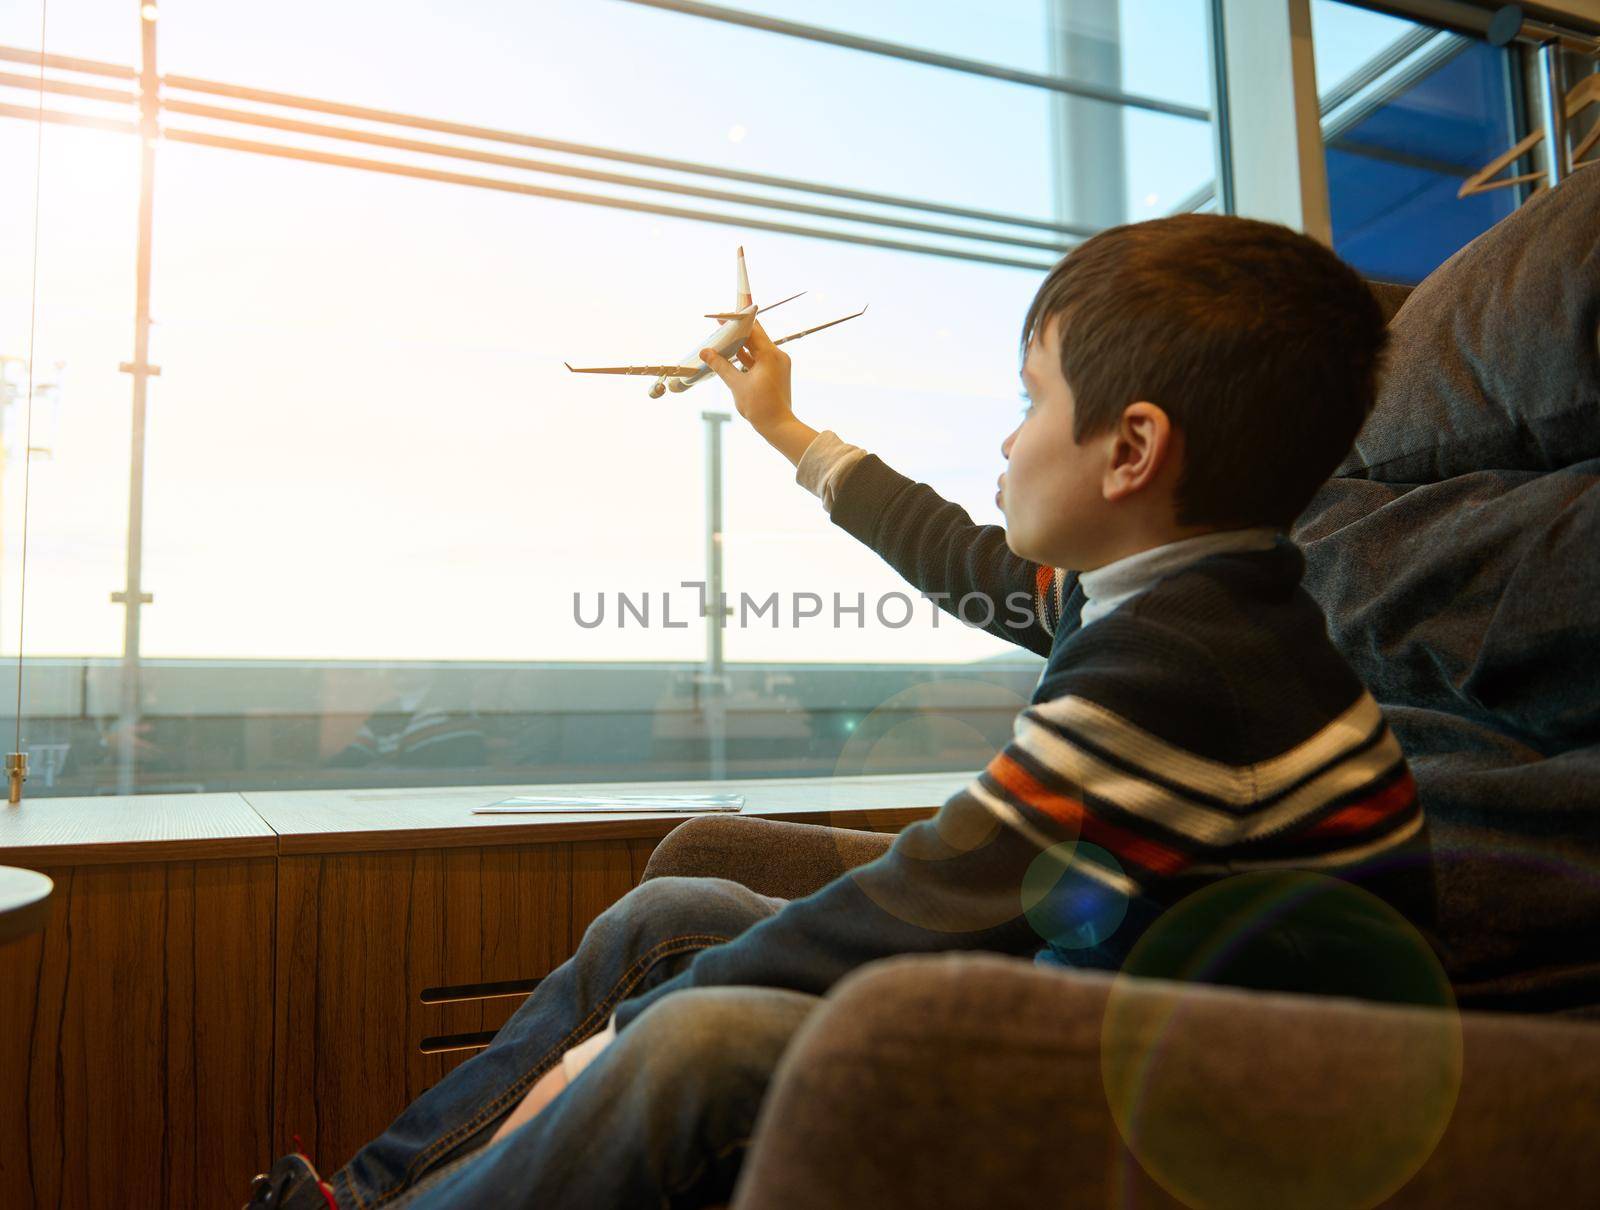 Portrait of adorable child boy holding a toy airplane in outstretched hand imitating flight, against panoramic windows overlooking the runway in the airport departure terminal while waiting for flight by artgf